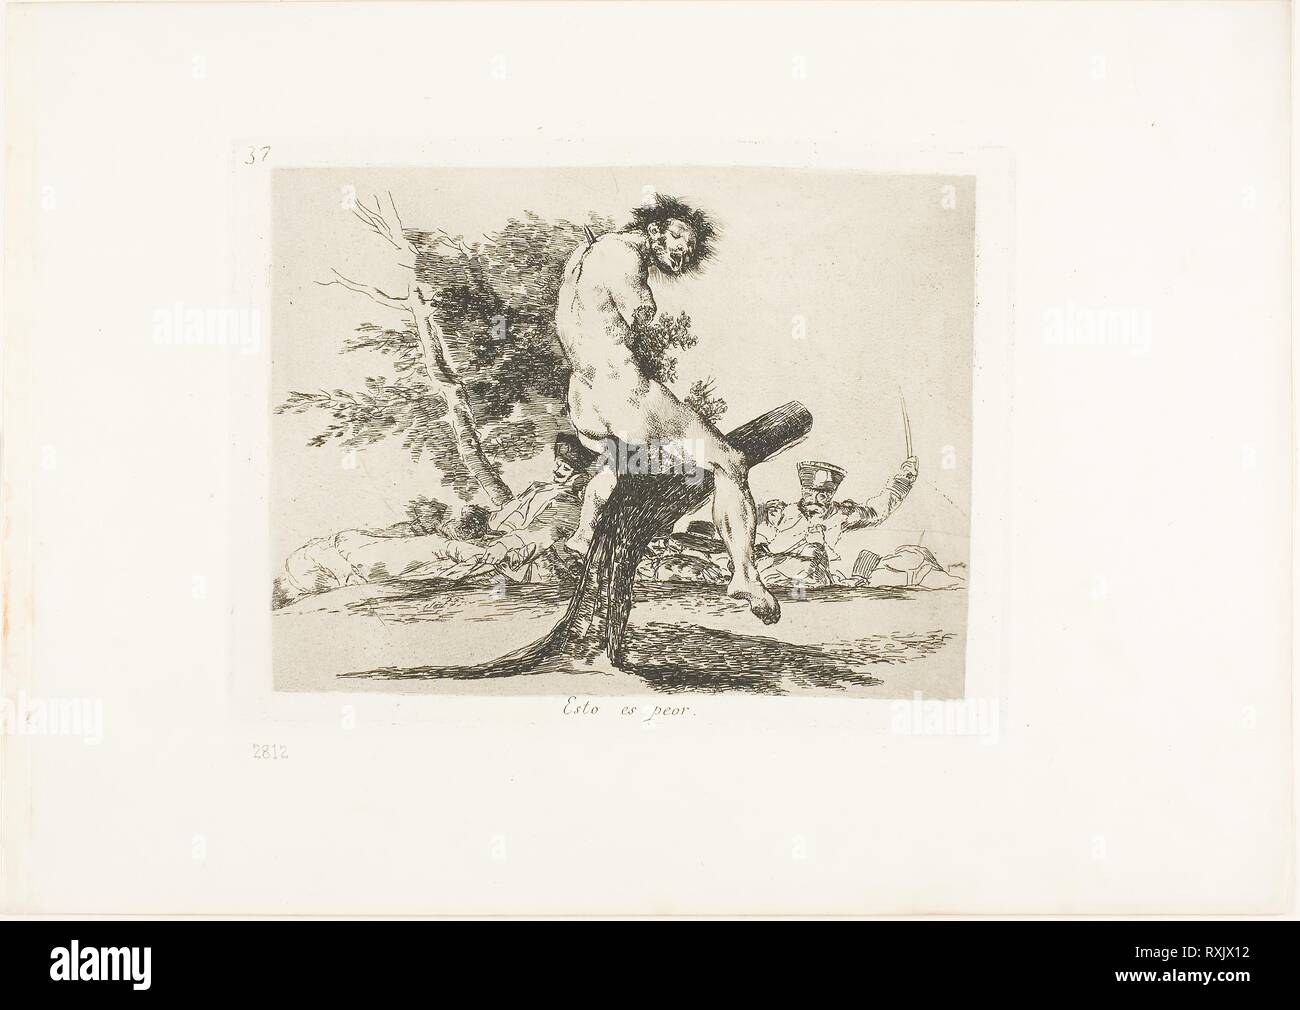 This is Worse, plate 37 from The Disasters of War. Francisco José de Goya y Lucientes; Spanish, 1746-1828. Date: 1812-1815. Dimensions: 139 x 185 mm (image); 153 x 208 mm (plate); 240 x 340 mm (sheet). Etching, lavis and drypoint on ivory wove paper with gilt edges. Origin: Spain. Museum: The Chicago Art Institute. Stock Photo